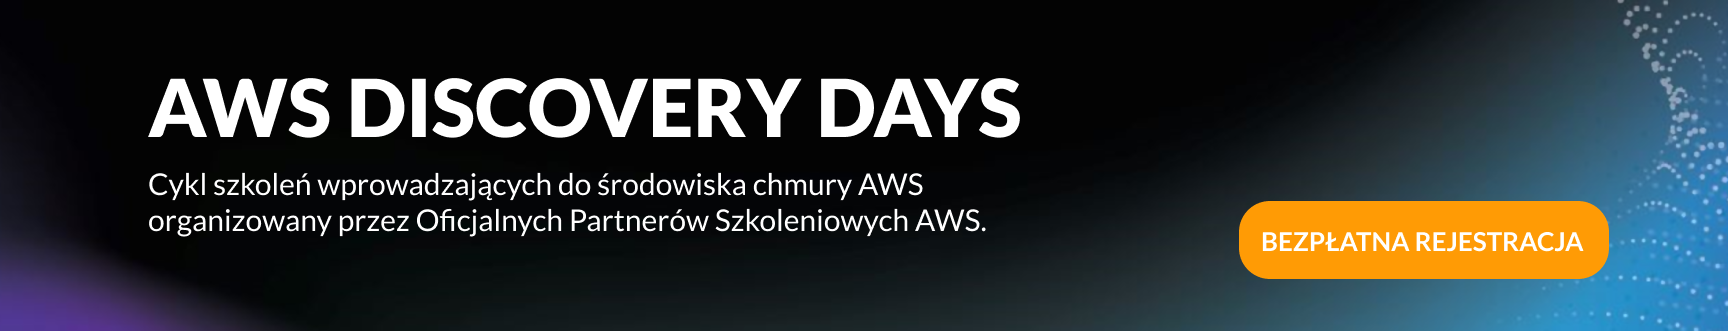 AWS Discovery Days